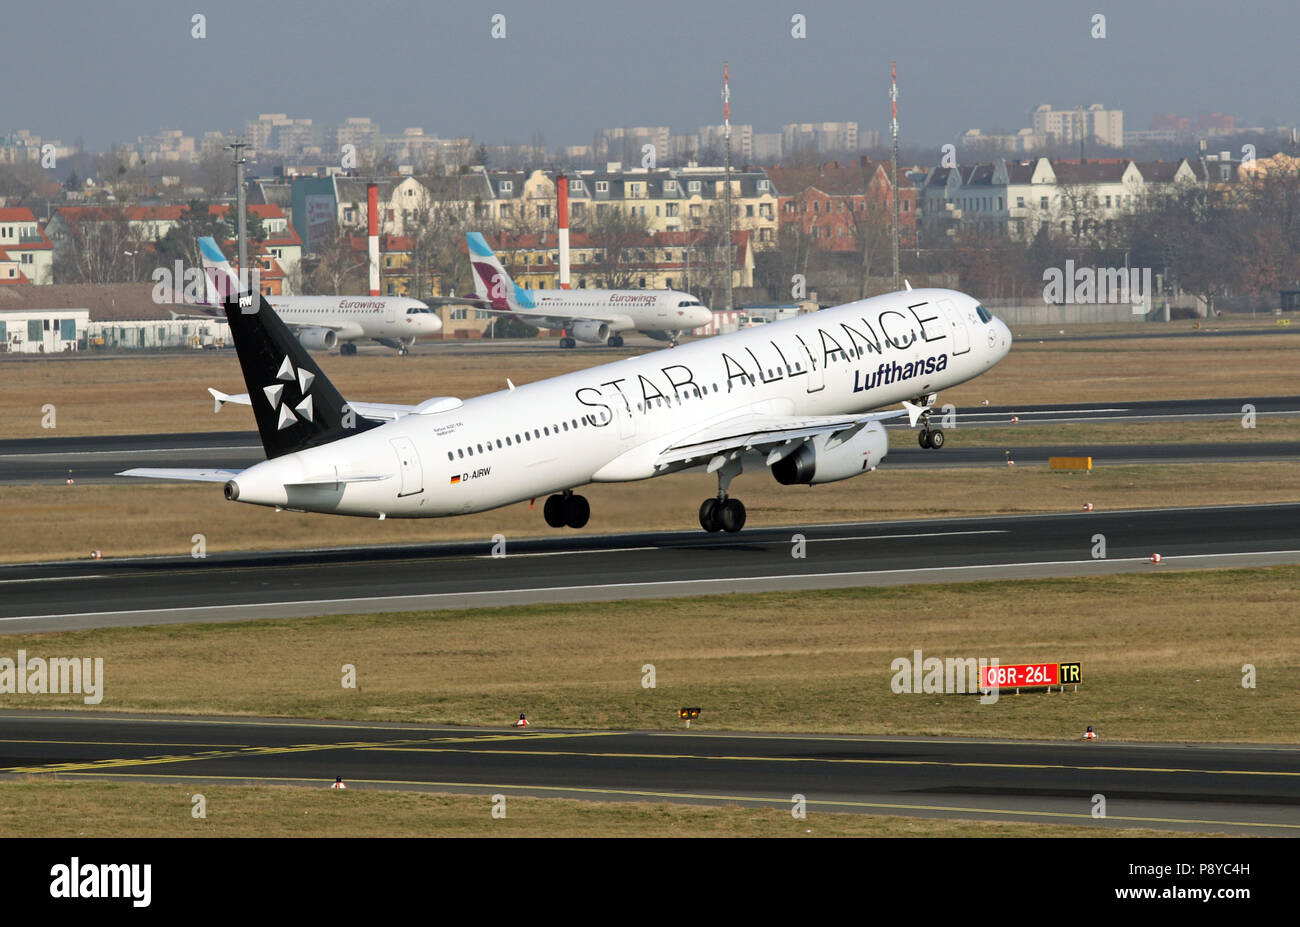 Berlin, Germany, Airbus A321 of the airline Lufthansa Star Alliance at the take-off from the airport Berlin-Tegel Stock Photo